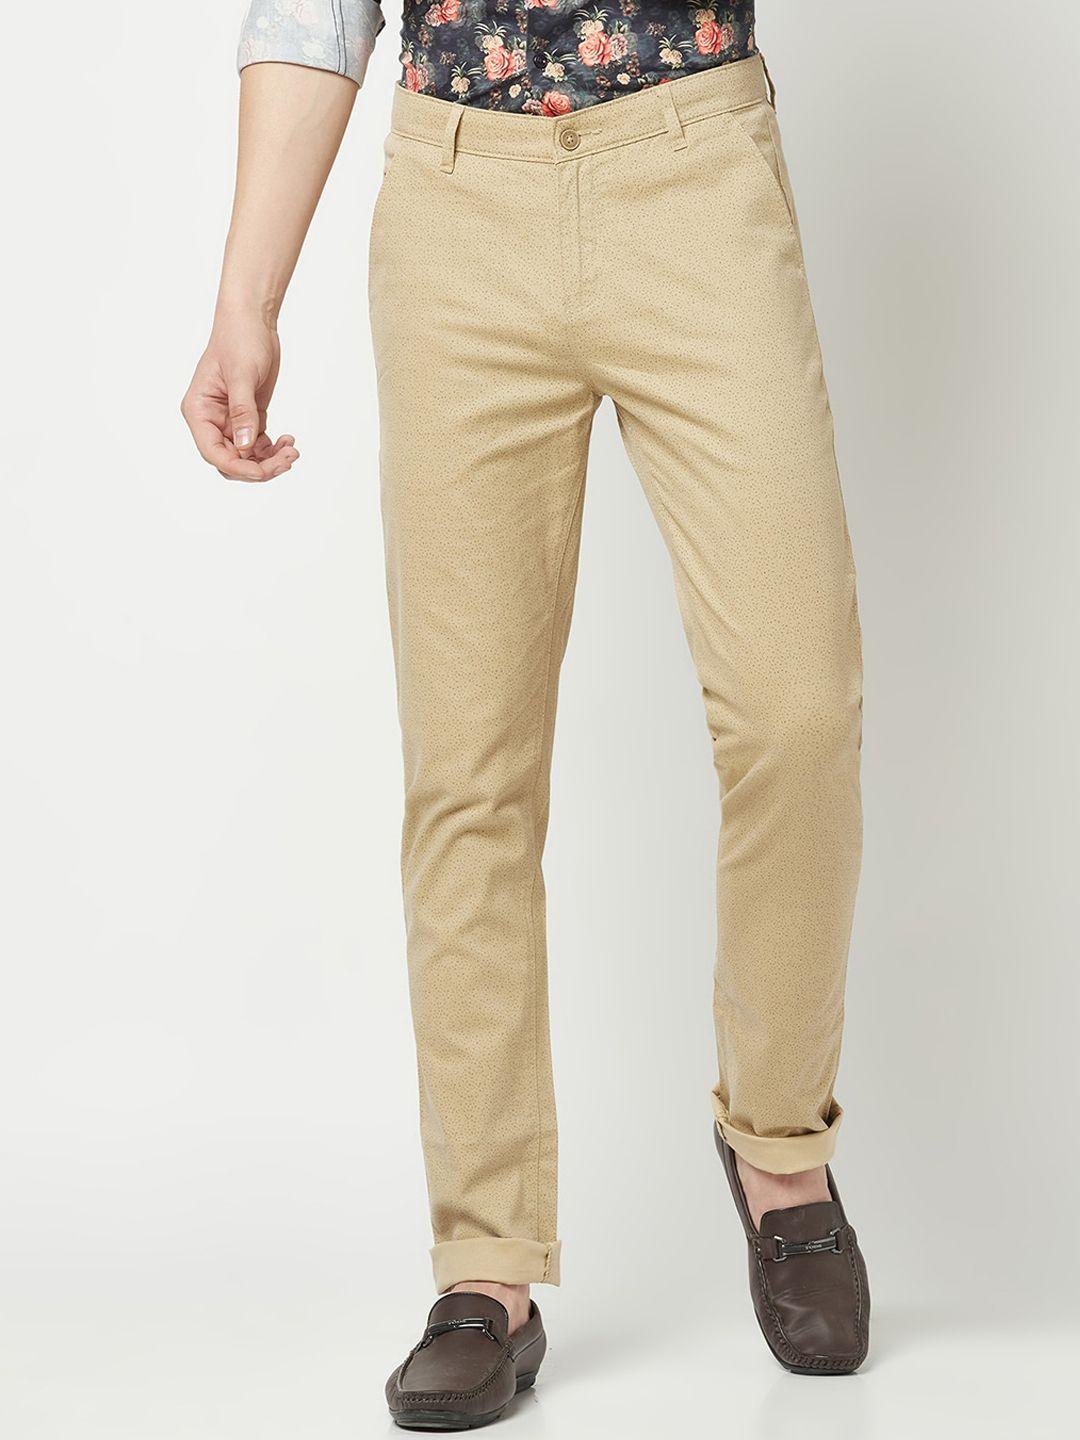 crimsoune-club-men-printed-relaxed-mid-rise-chinos